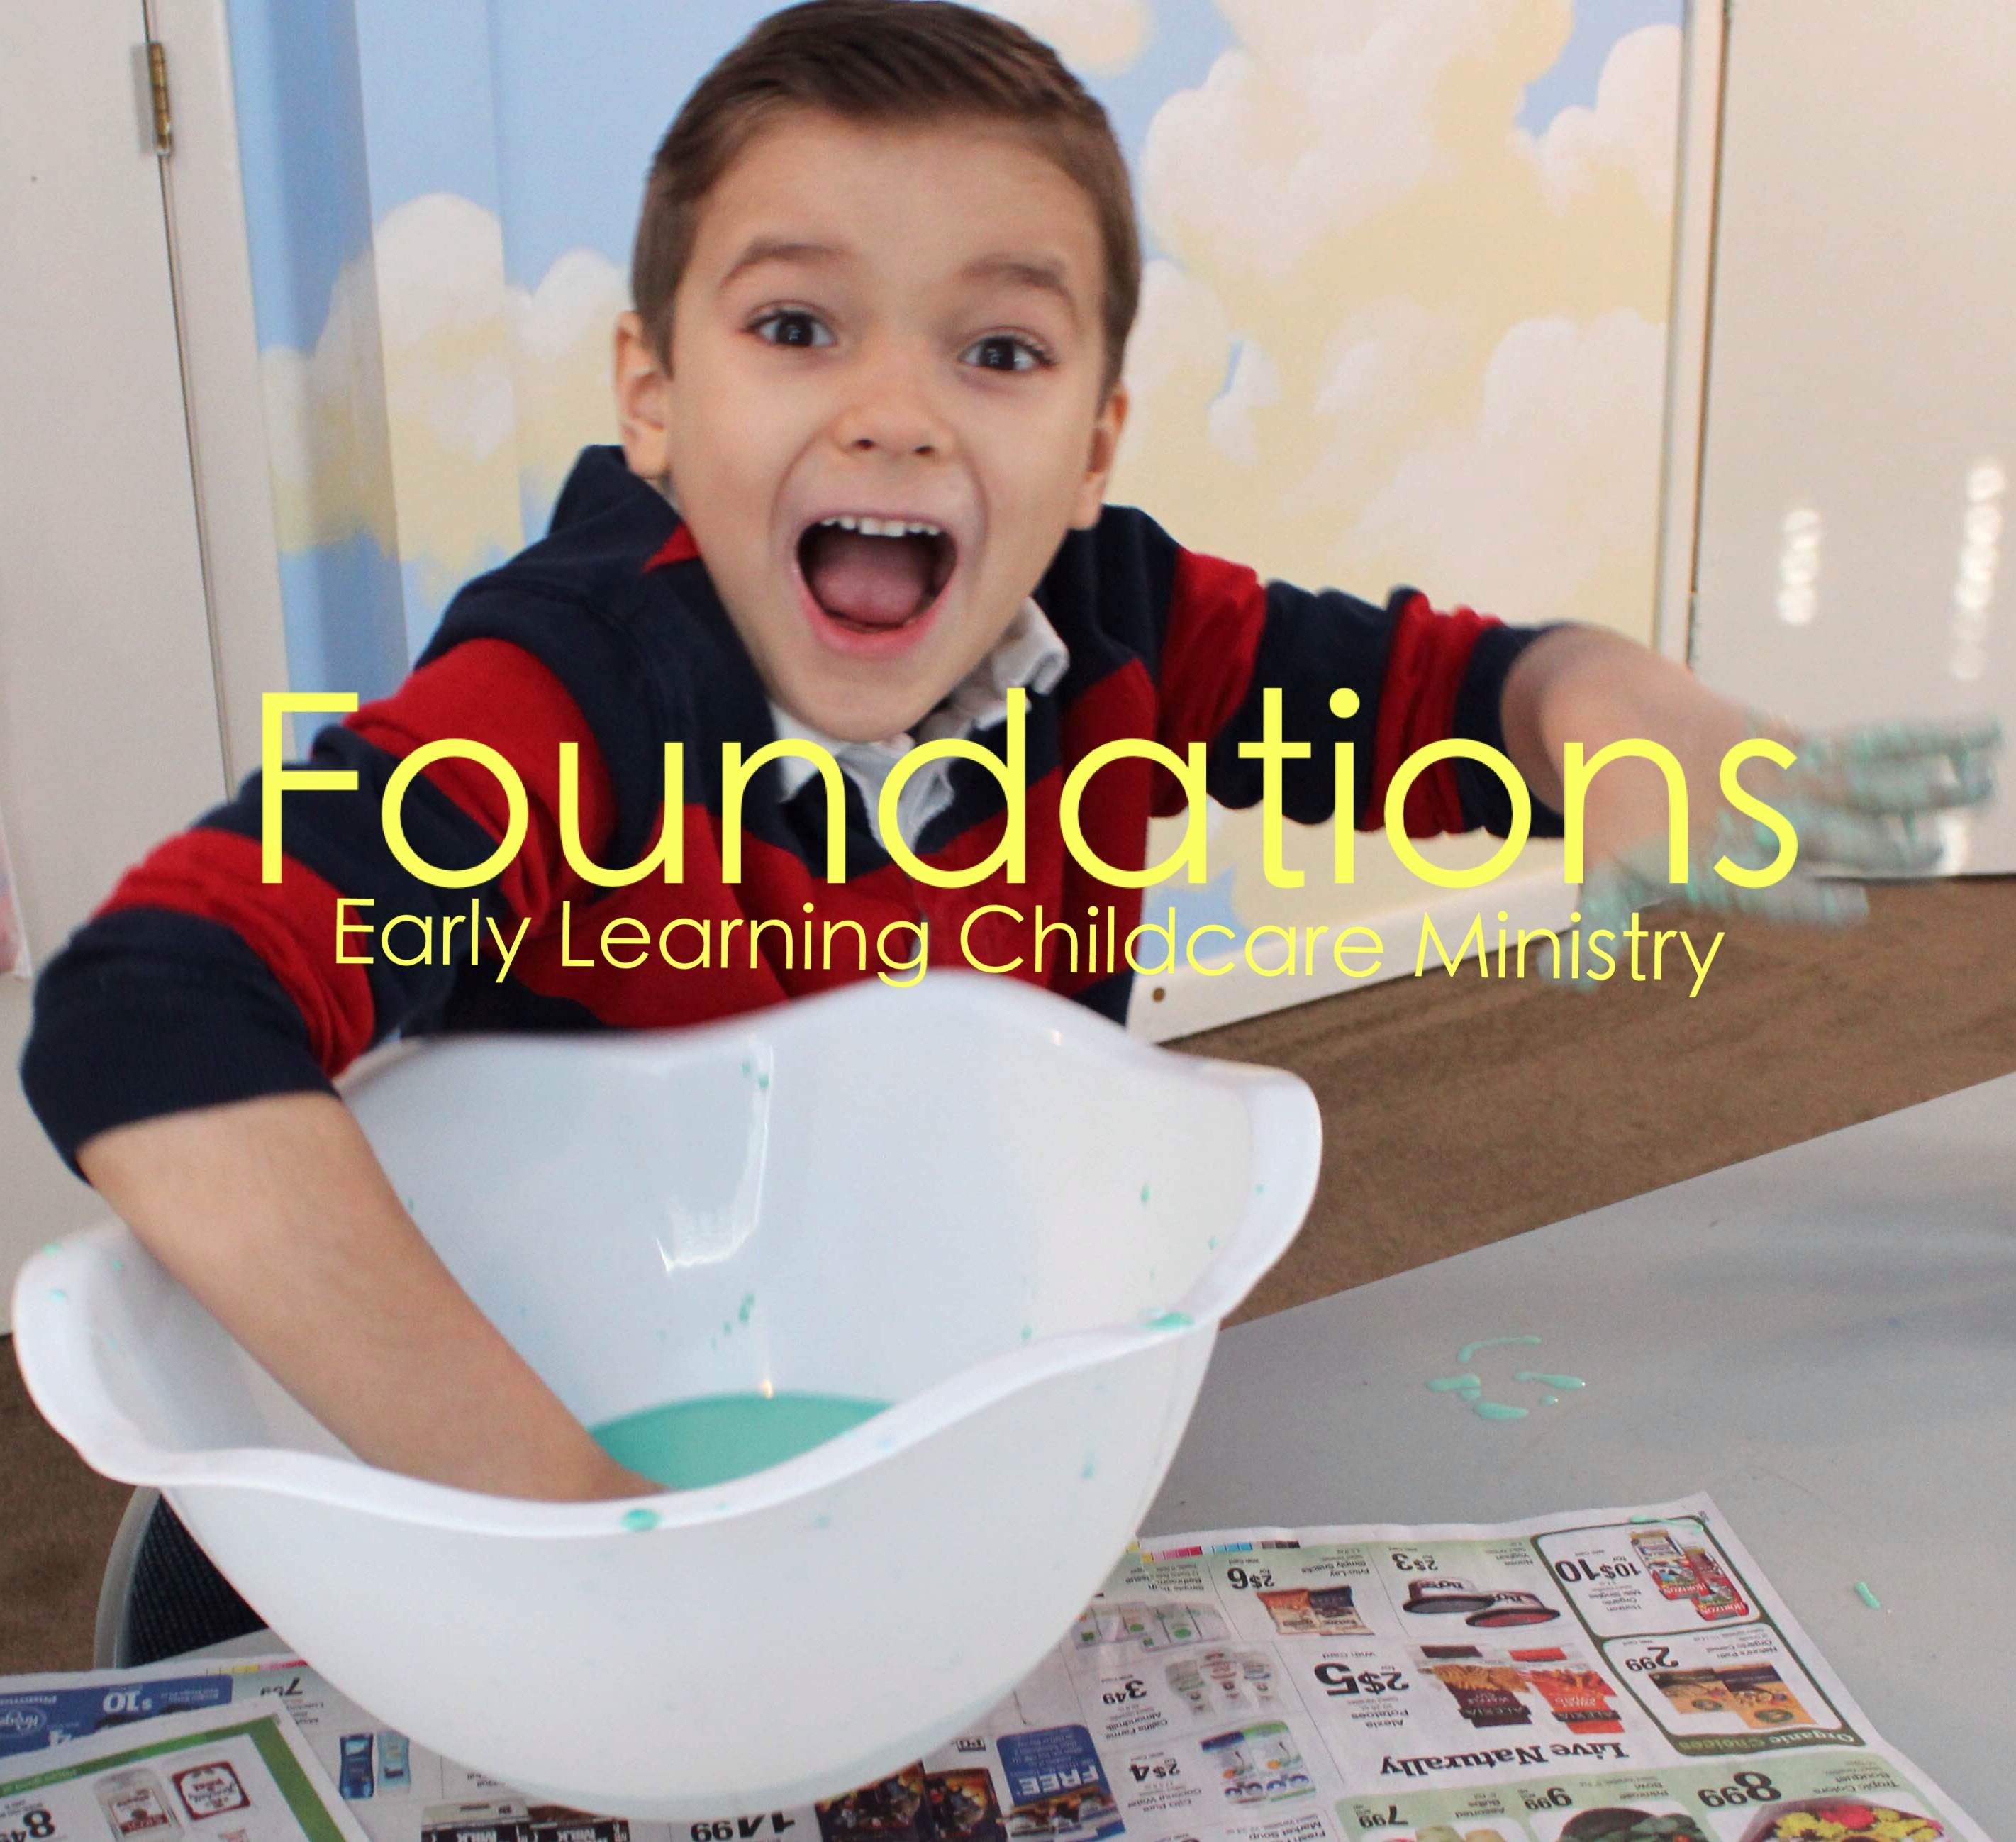 Foundations Early Learning Childcare Ministry